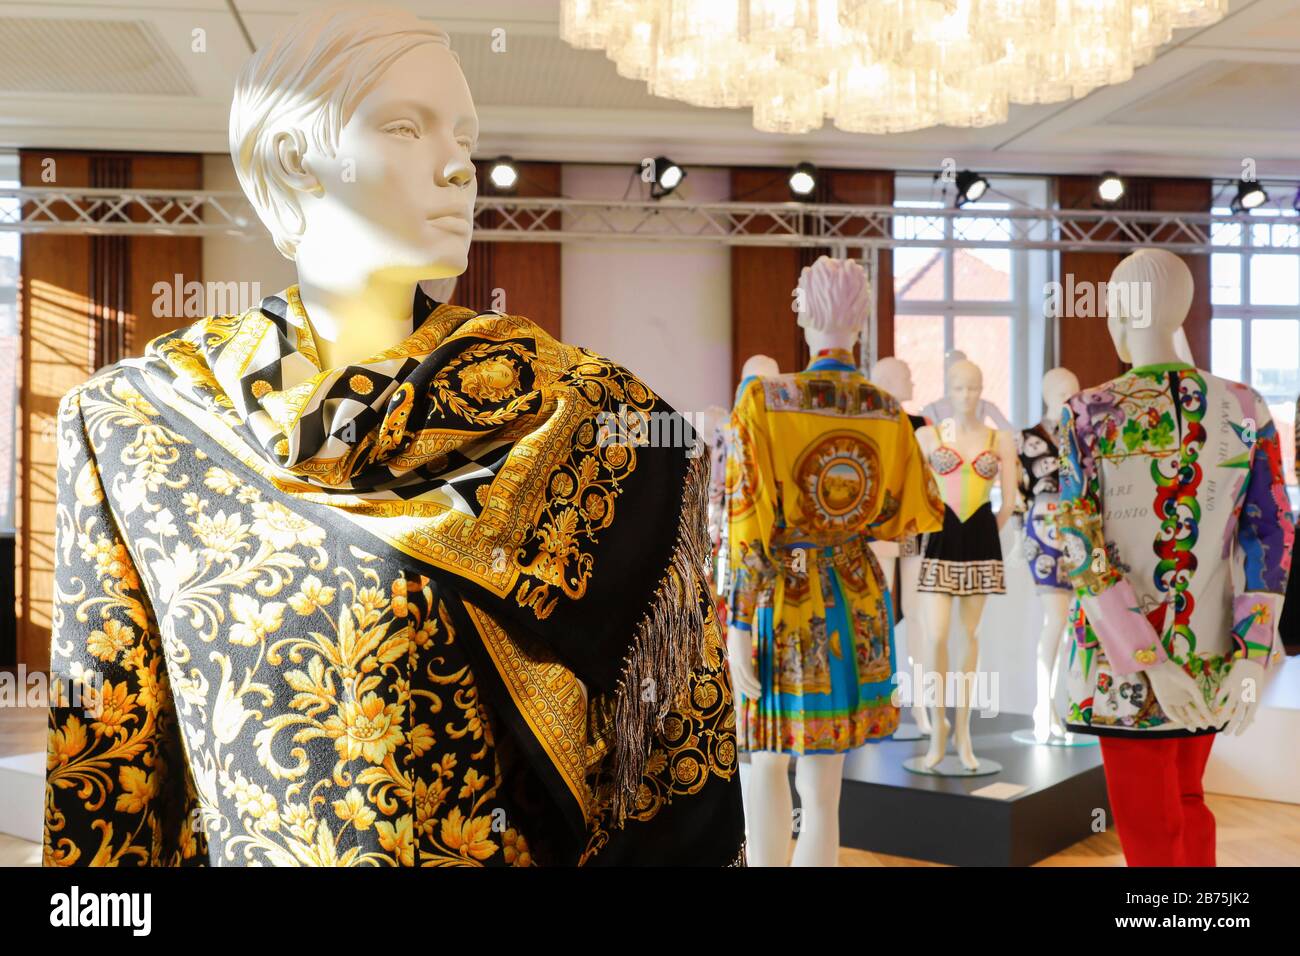 View of the Gianni Versace Retrospective exhibition in Berlin, on  05.02.2018. Versace exhibited in Berlin for the first time in 1994. Three  years later he was murdered in Florida. 20 years after